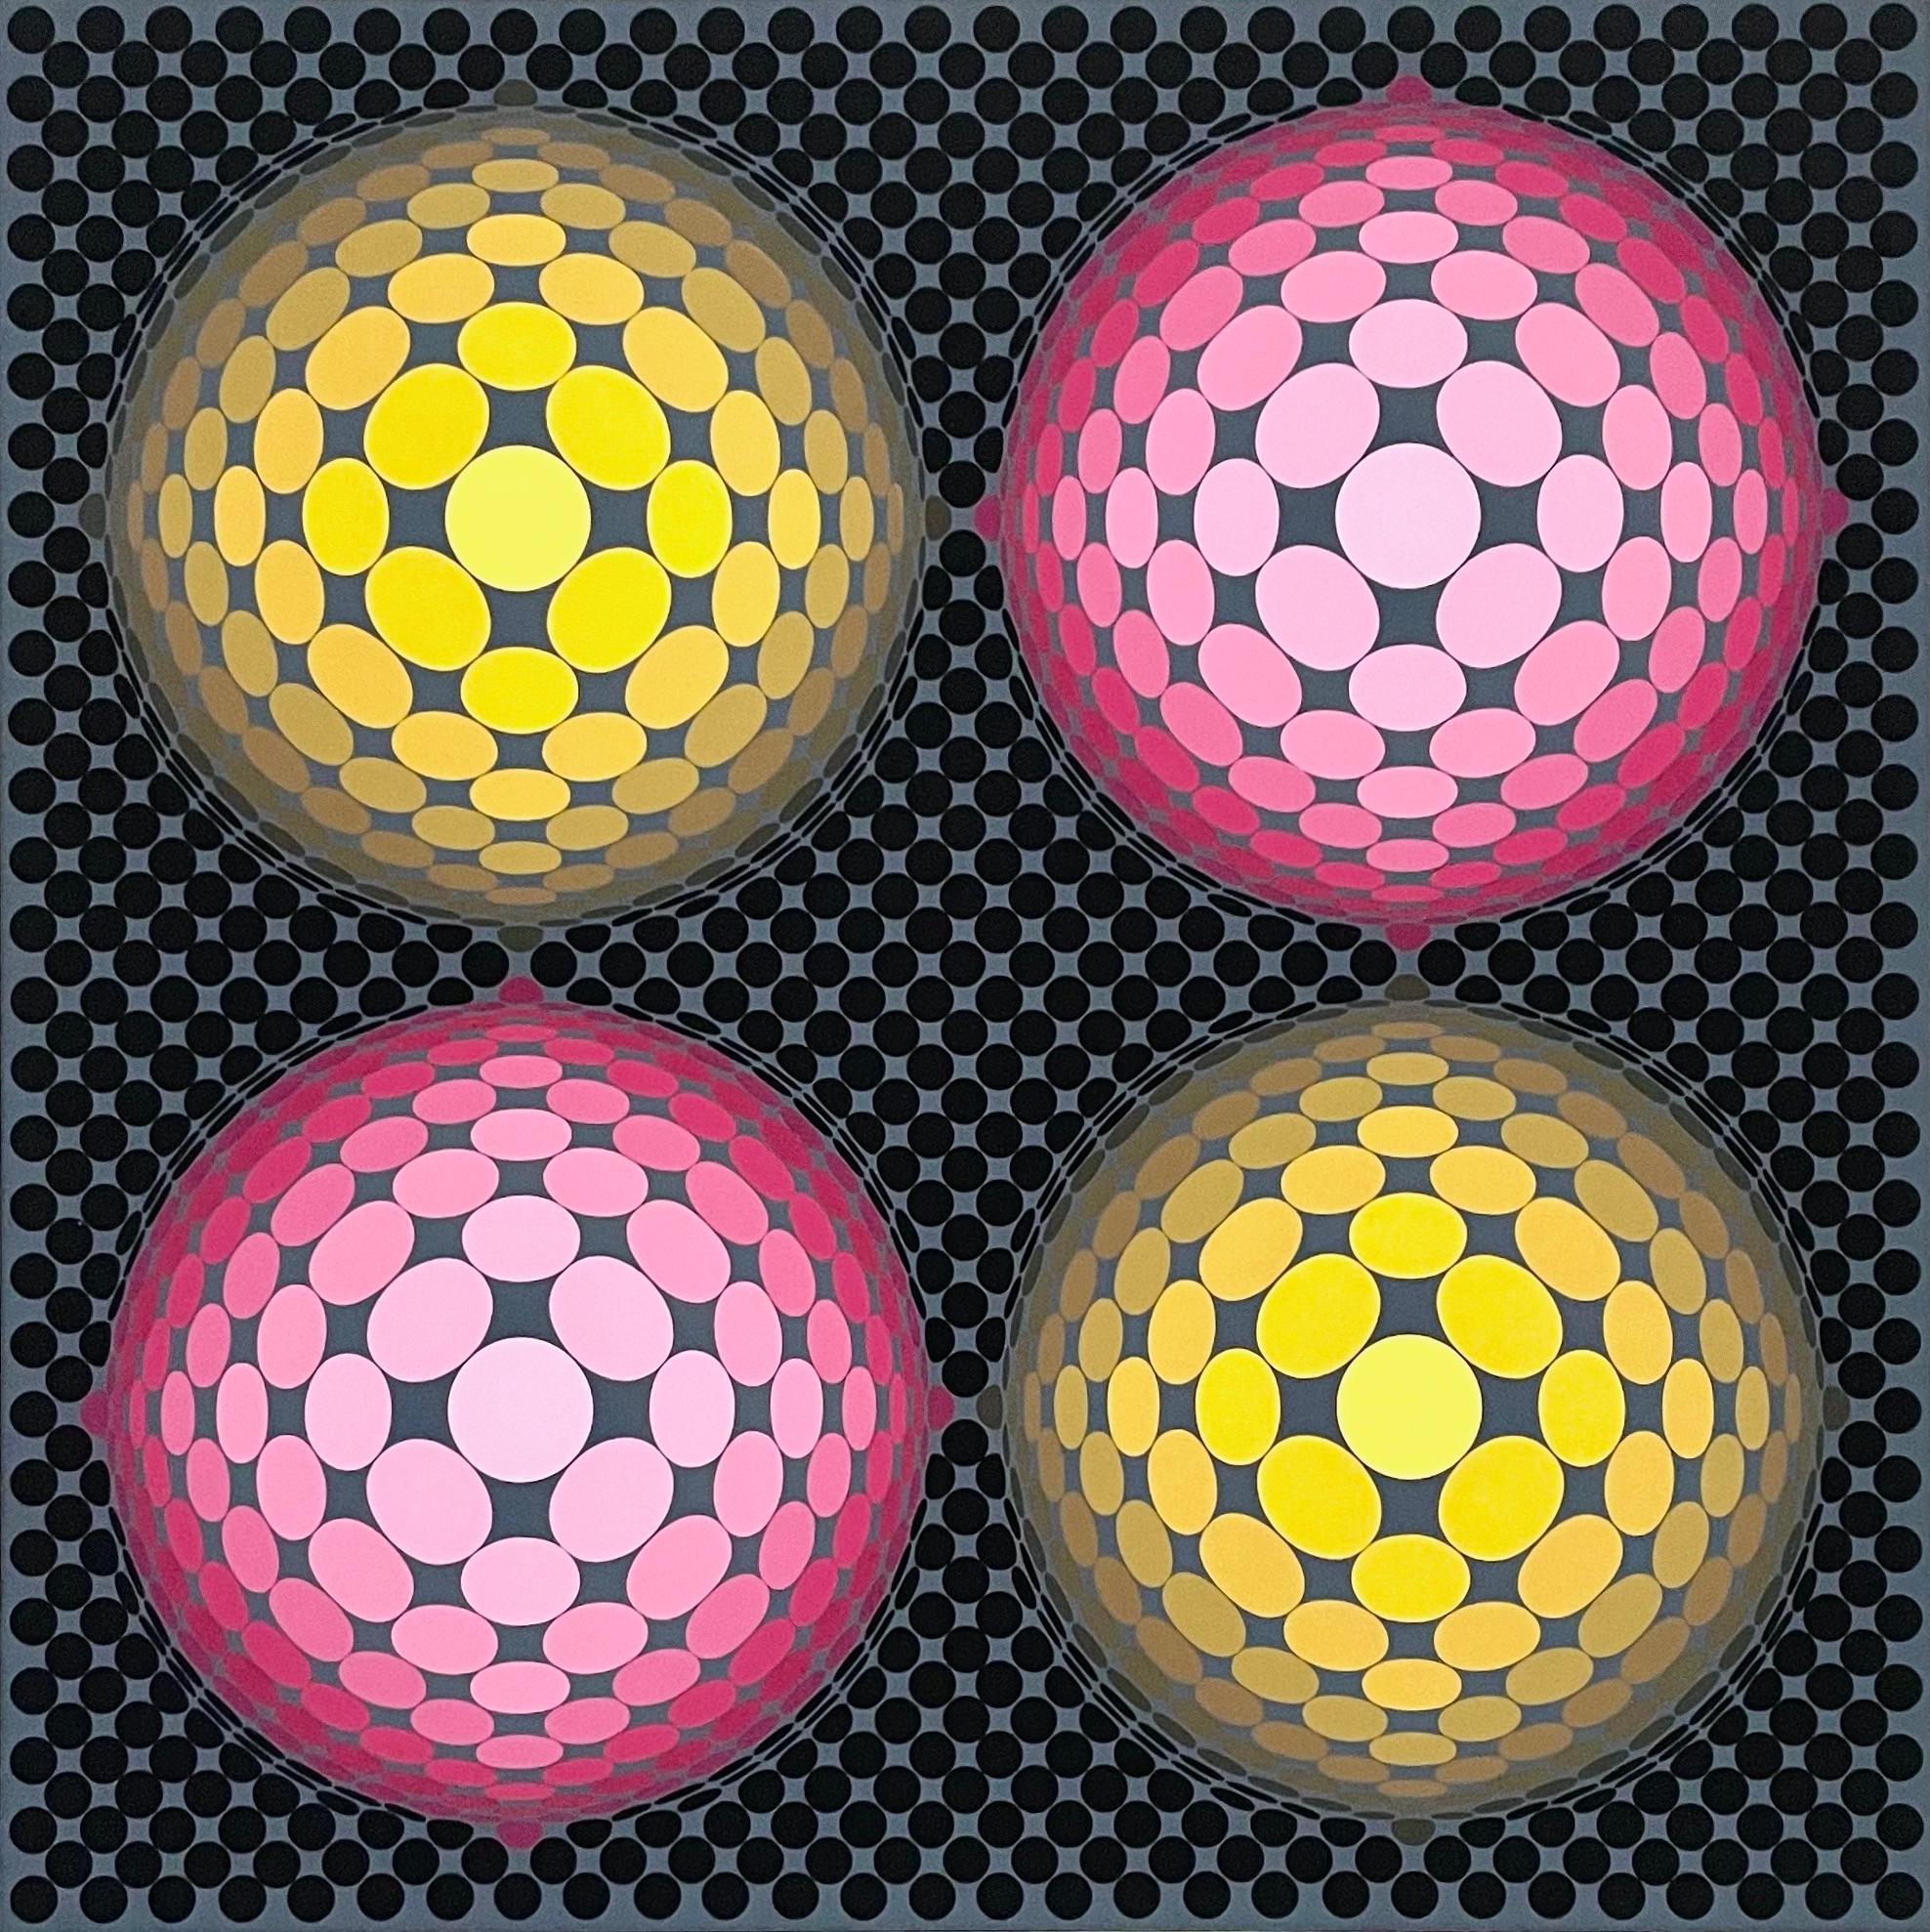 Artist: Victor Vasarely (1908-1997)
Title: Metagalaxie
Year: 1989
Medium: Silkscreen on Arches paper
Edition: 103/250, plus proofs
Size: 32 x 27.55 inches
Condition: Good
Inscription: Signed and numbered by the artist
Notes: Published by Editions